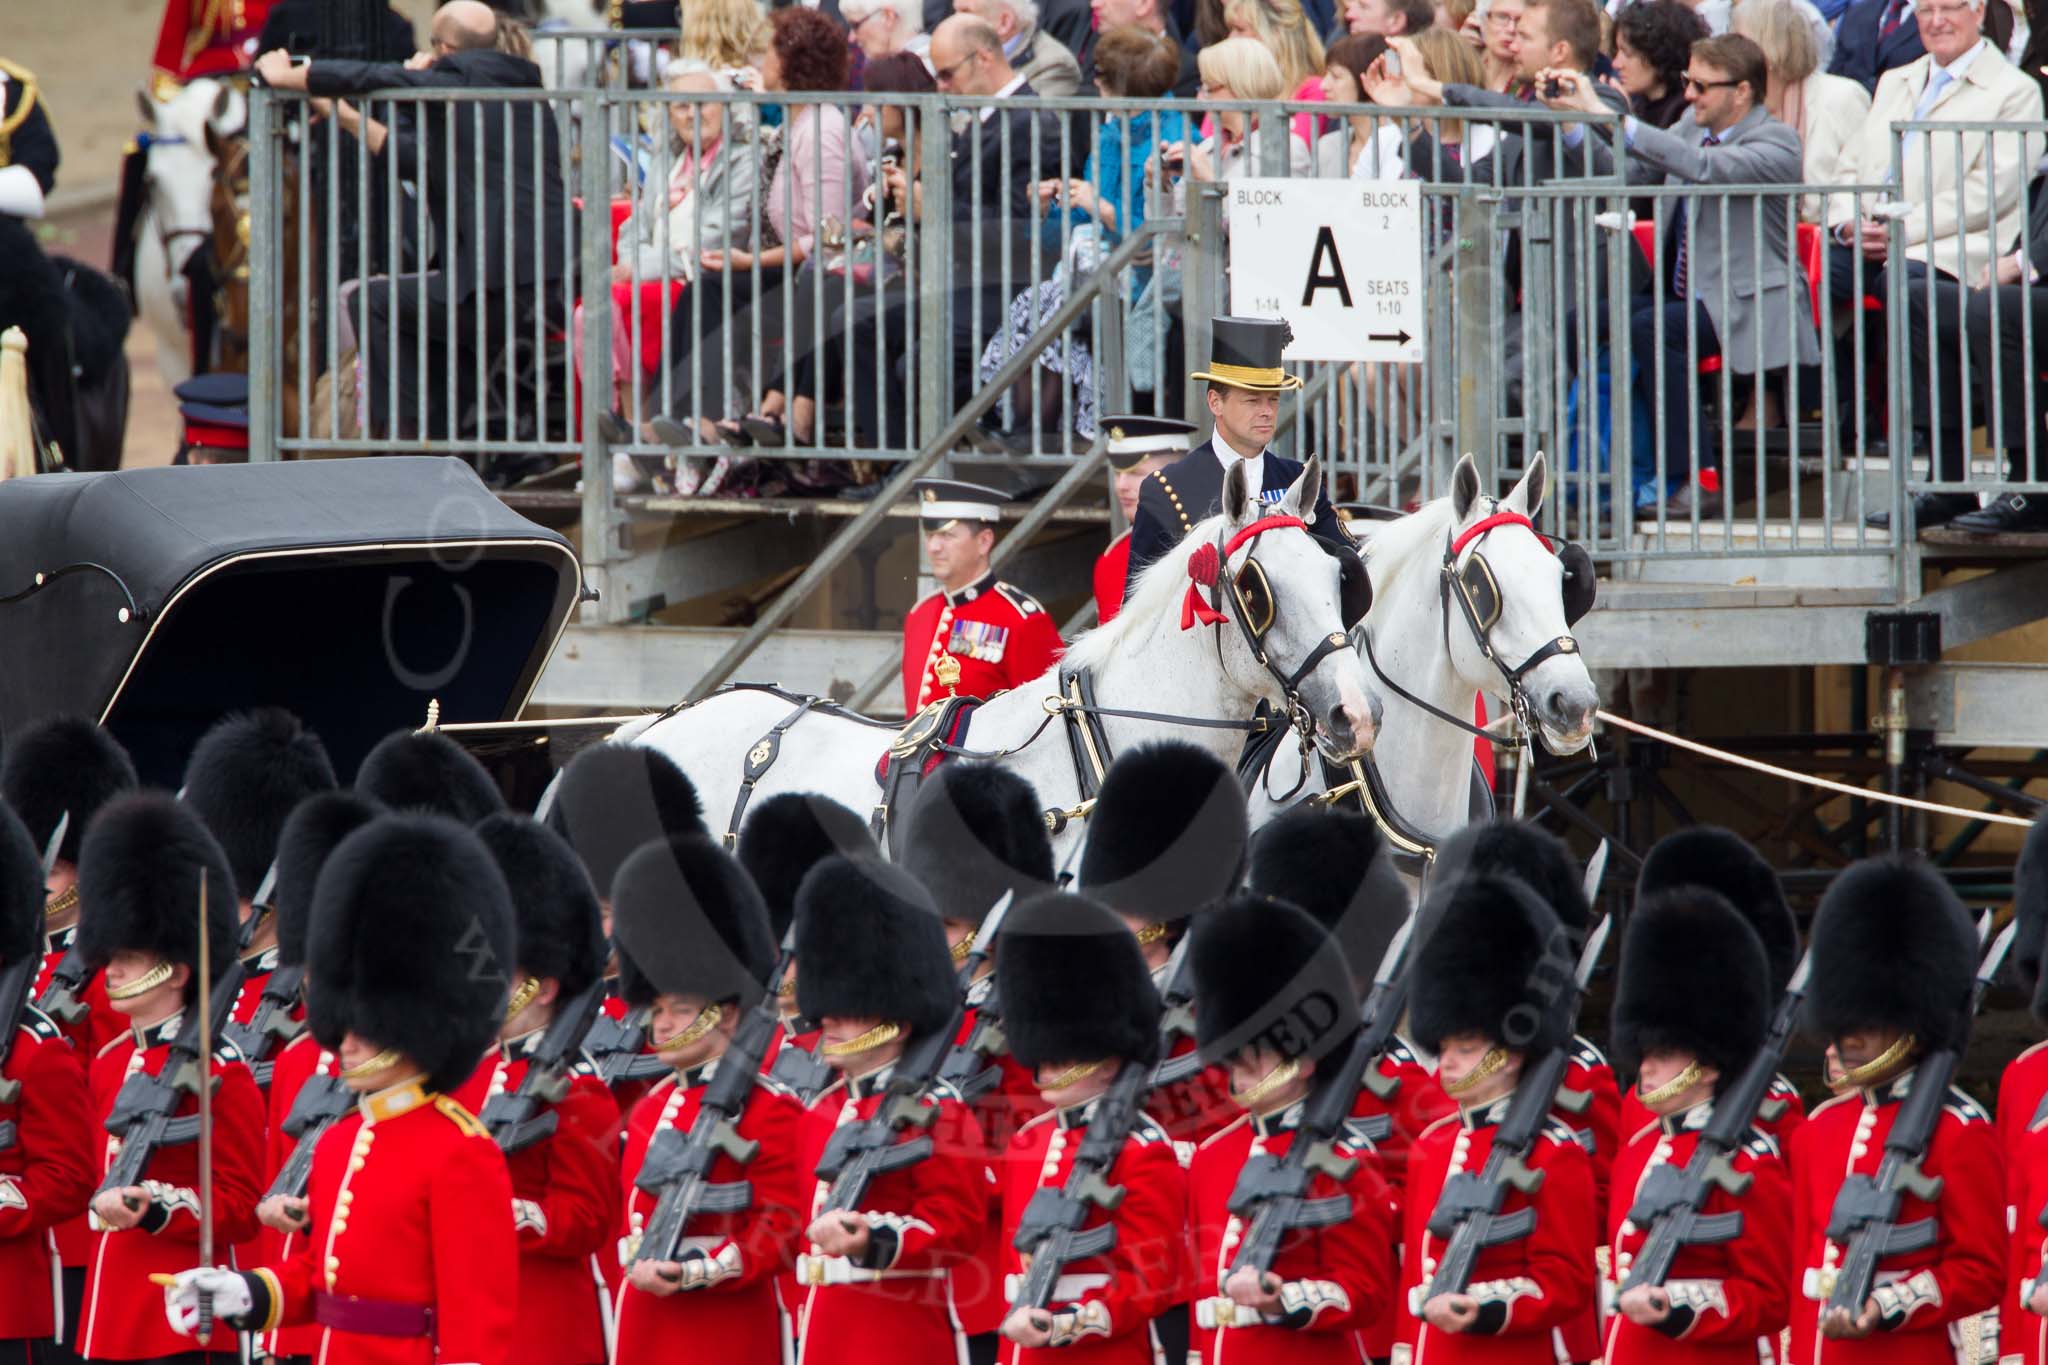 The Colonel's Review 2012: Jack Hargreaves, Royal Coachman, with the two Windsor Grey horses..
Horse Guards Parade, Westminster,
London SW1,

United Kingdom,
on 09 June 2012 at 10:57, image #145